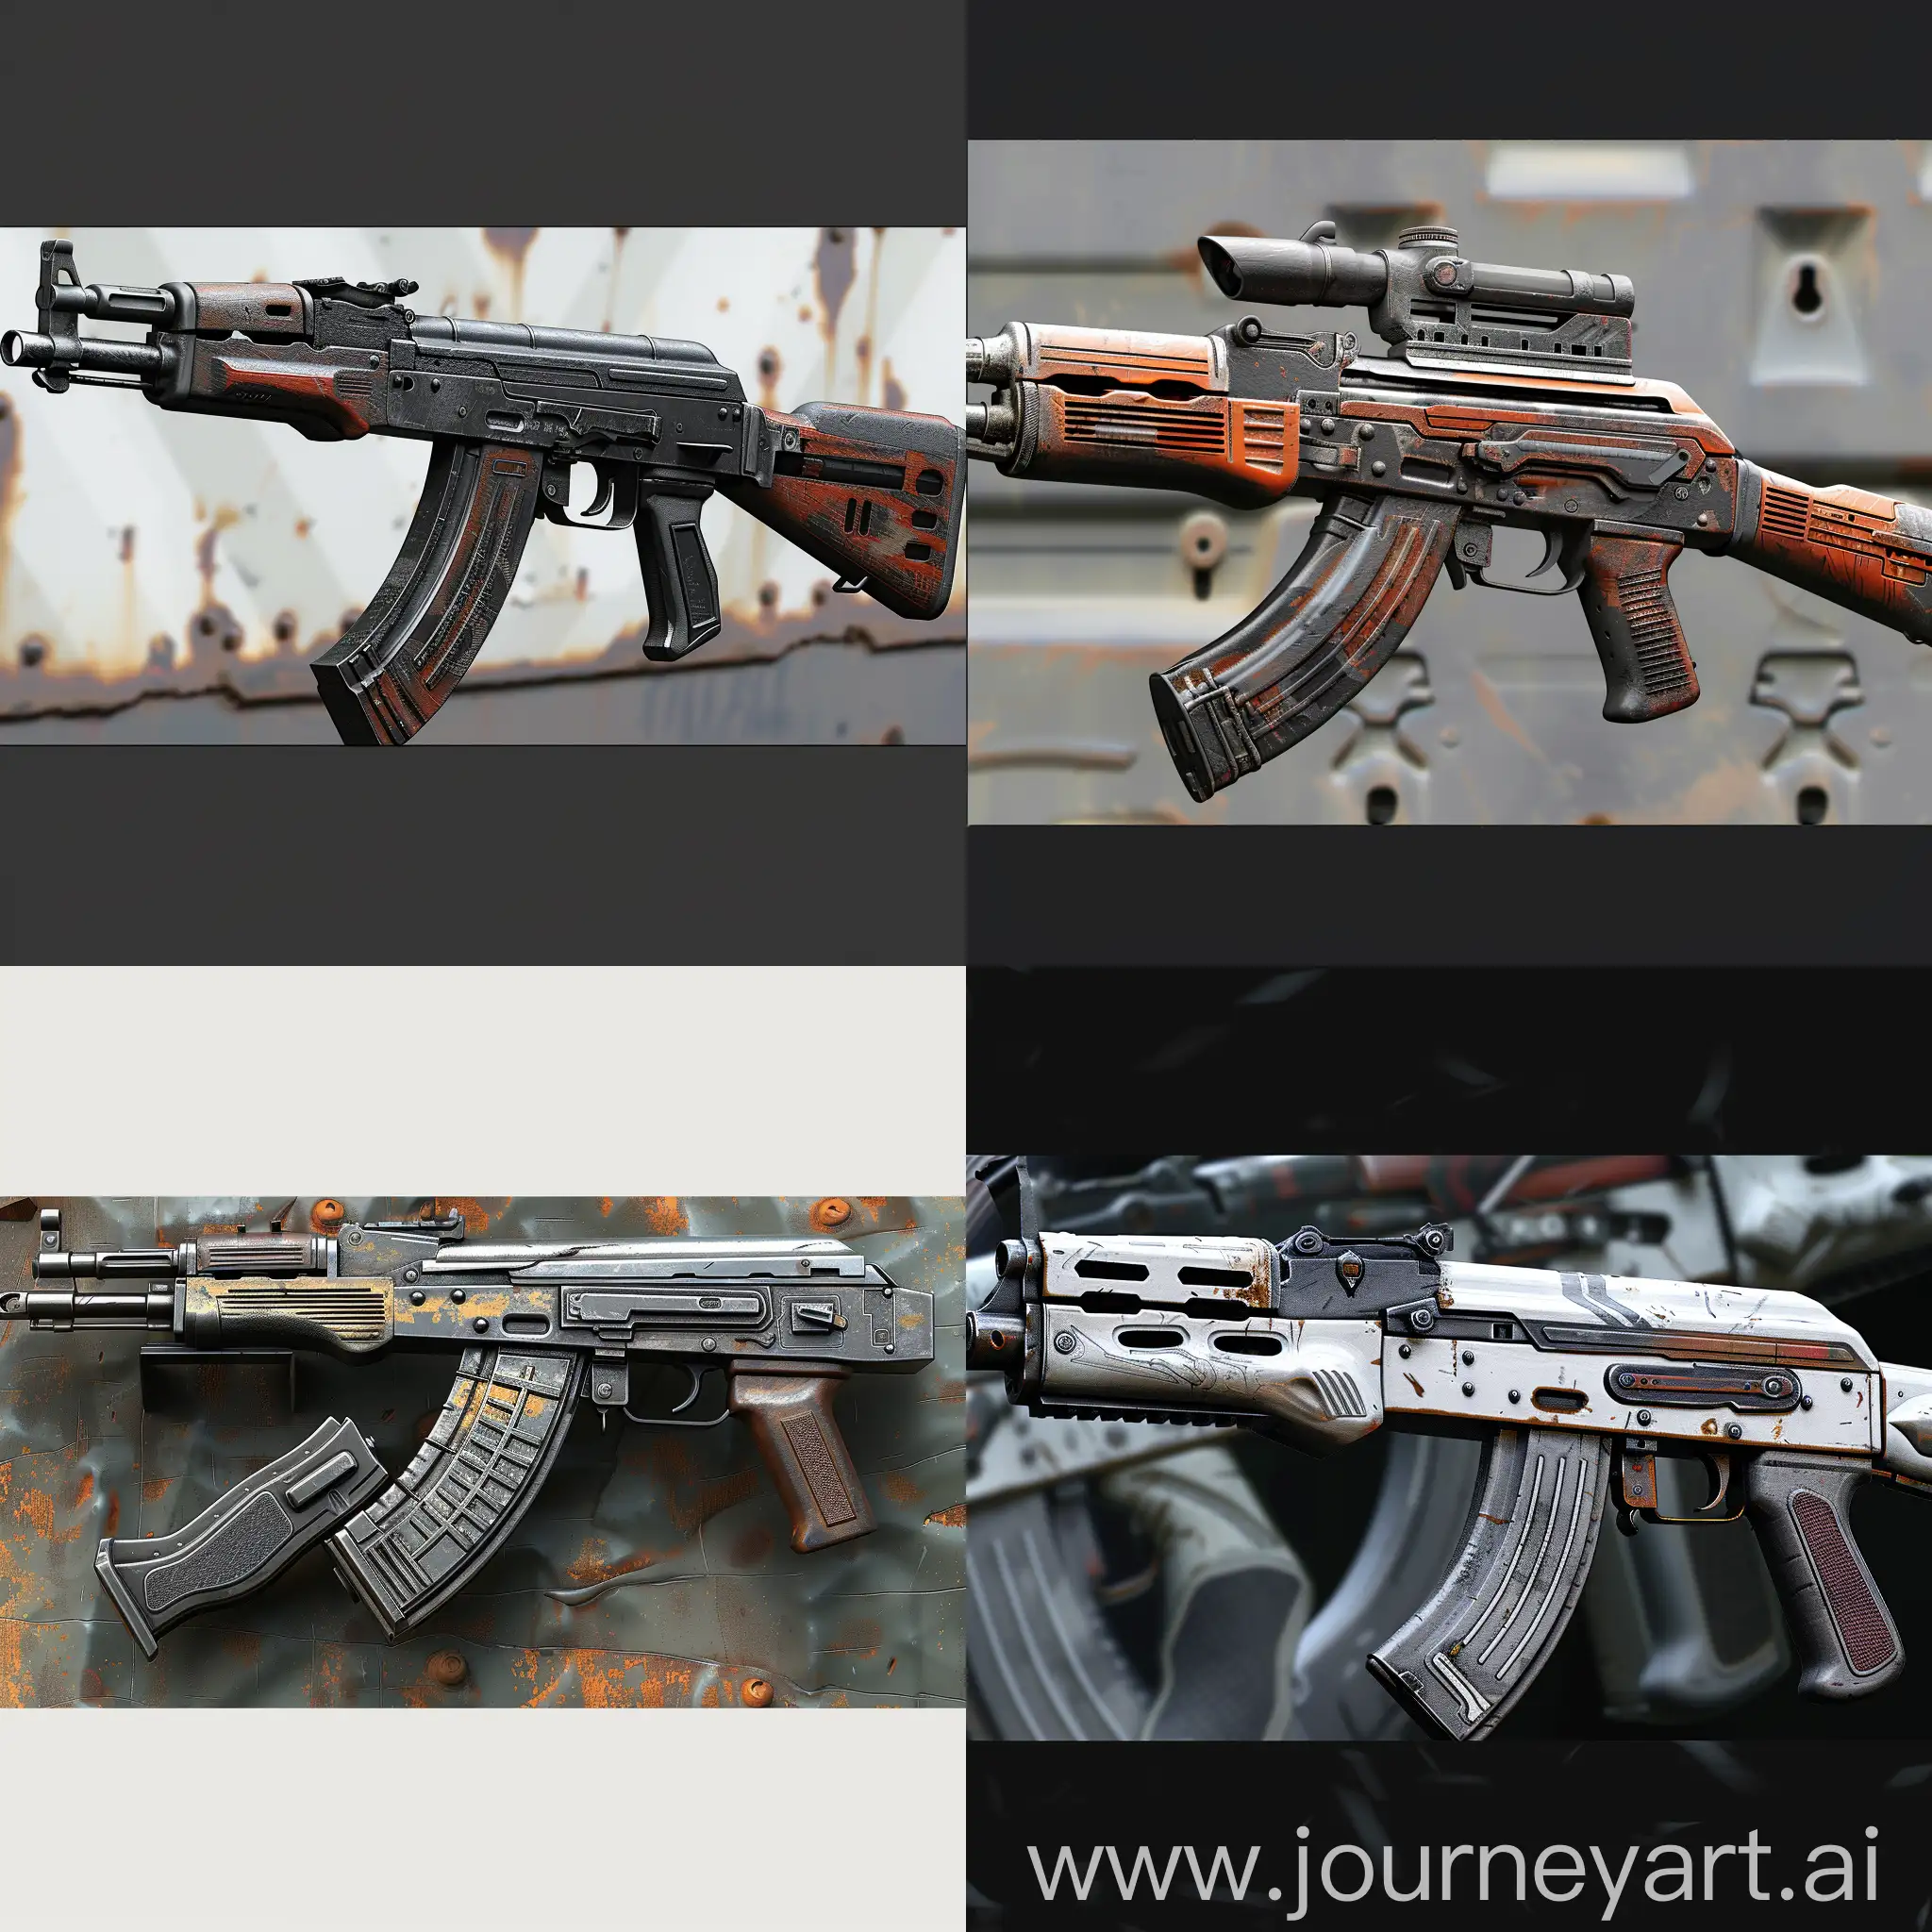 Futuristic-AK47-with-Advanced-Materials-and-Smart-Technology